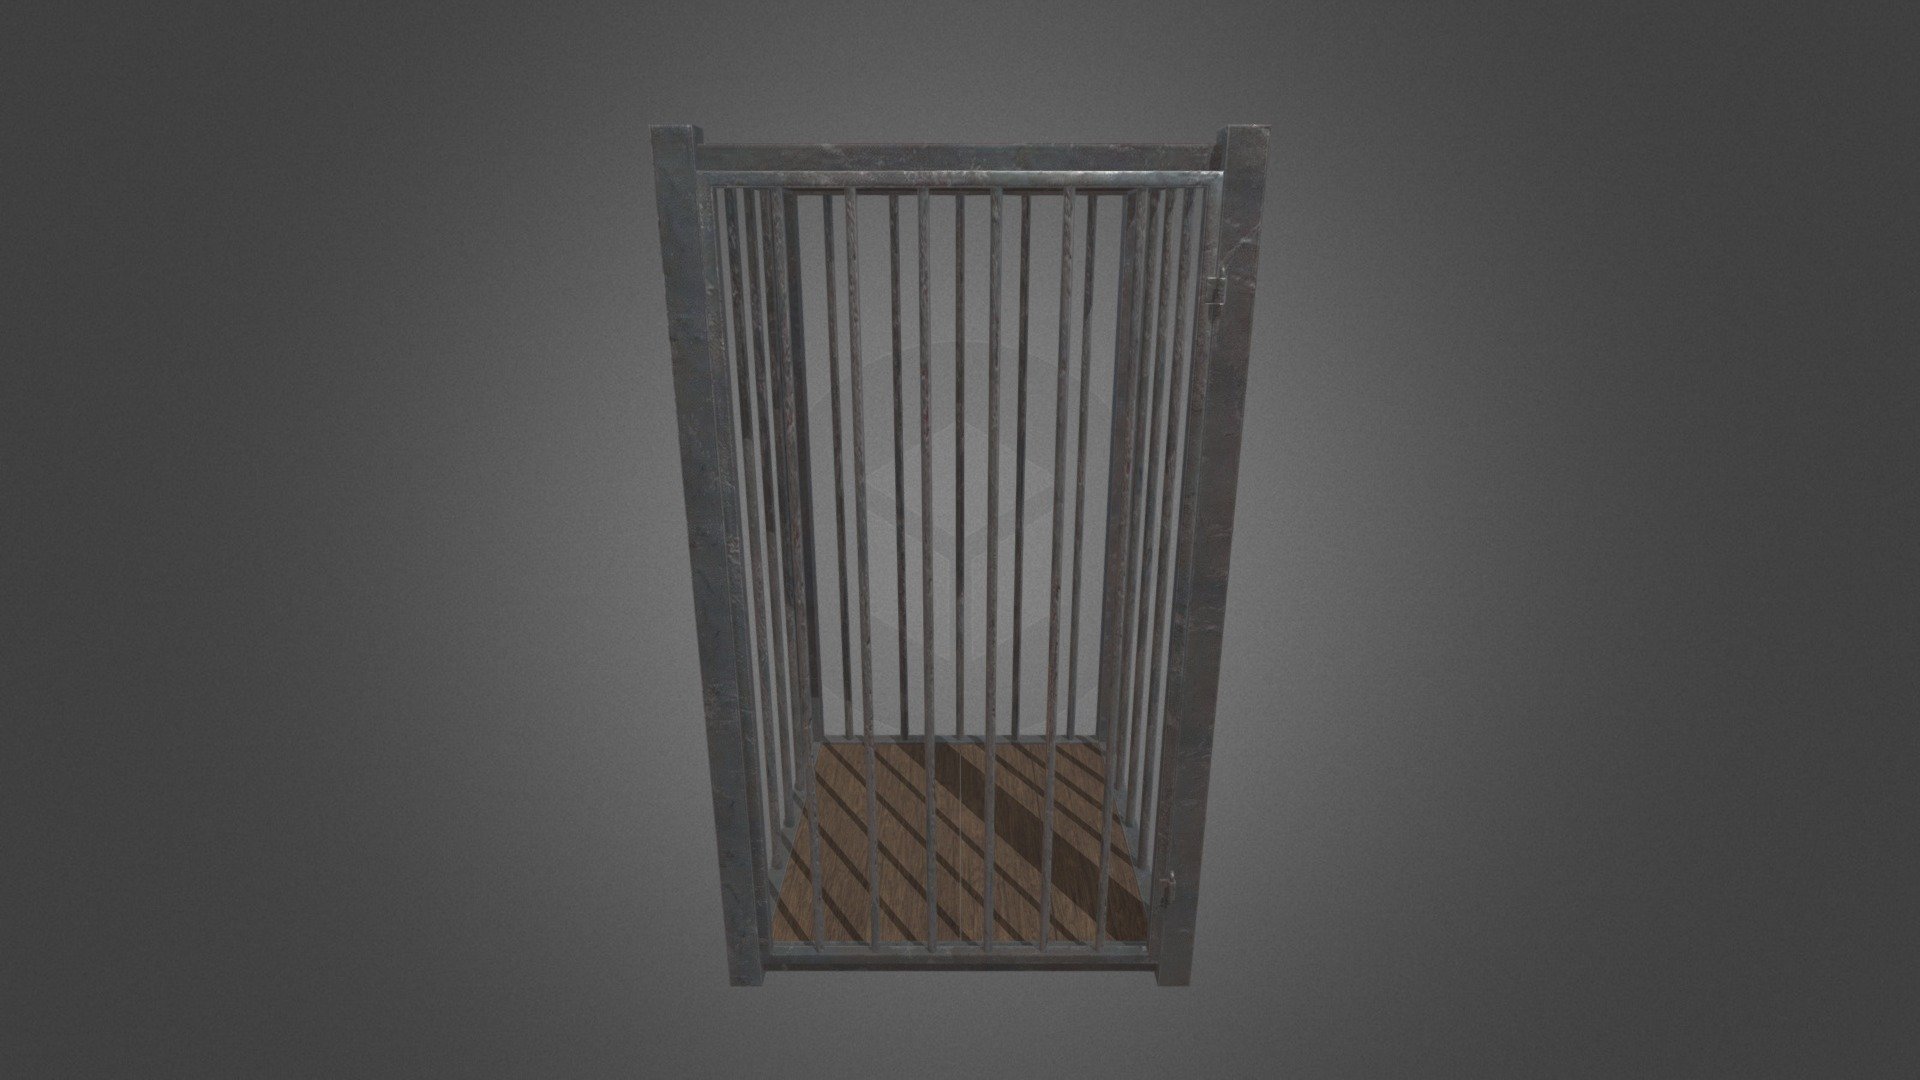 High-Quality low-poly 3D prison cage model. Ready to use in medieval, fantasy style projects. AR/VR compatible. PBR textures. Standard materials with topology clean mesh 3d model